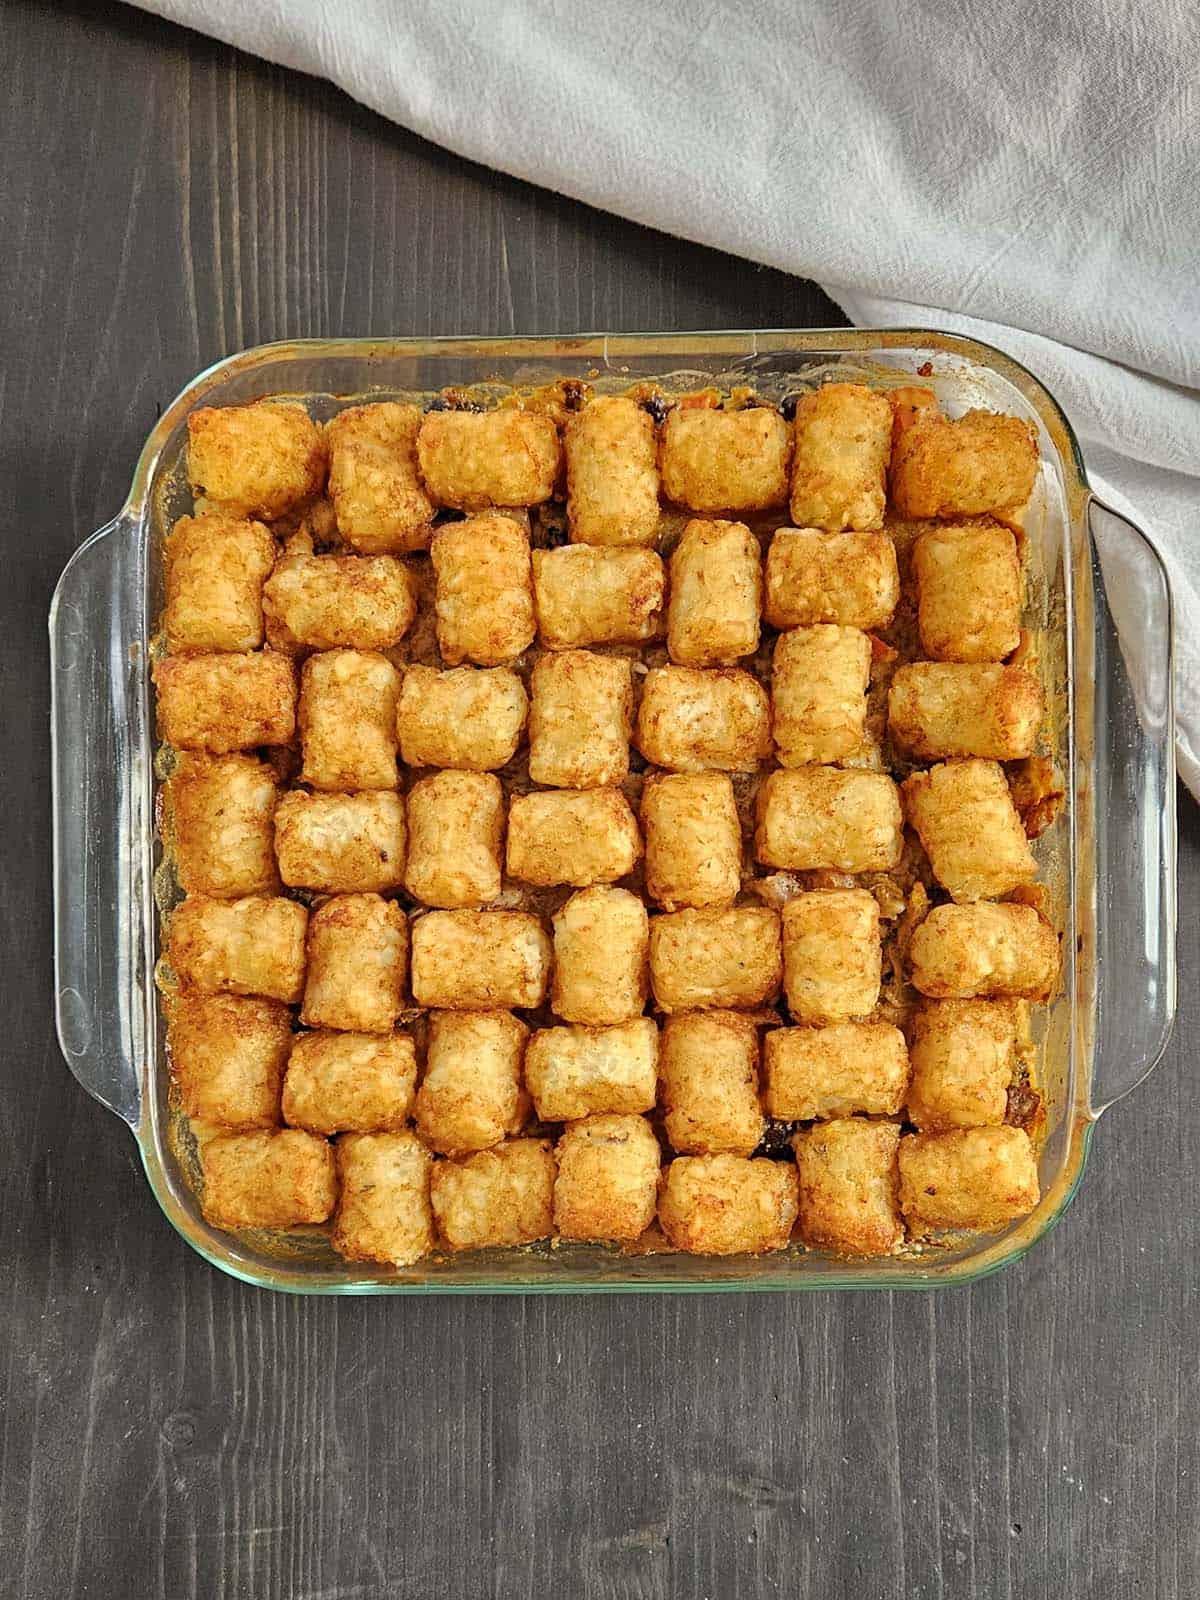 Pork casserole topped with tater tots in a glass casserole dish.